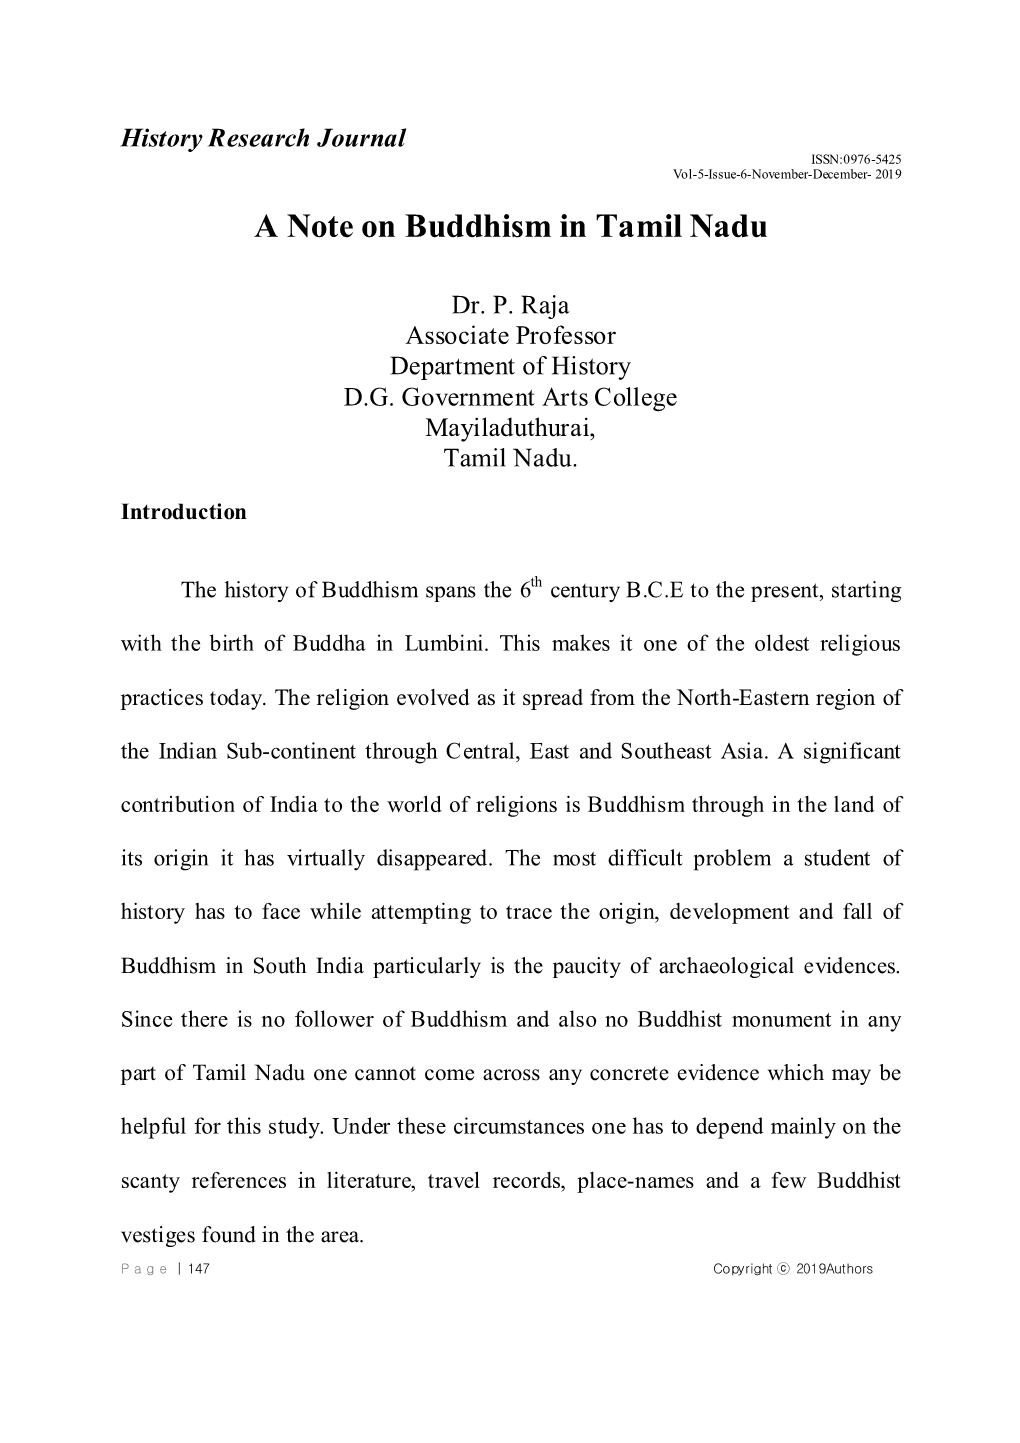 A Note on Buddhism in Tamil Nadu